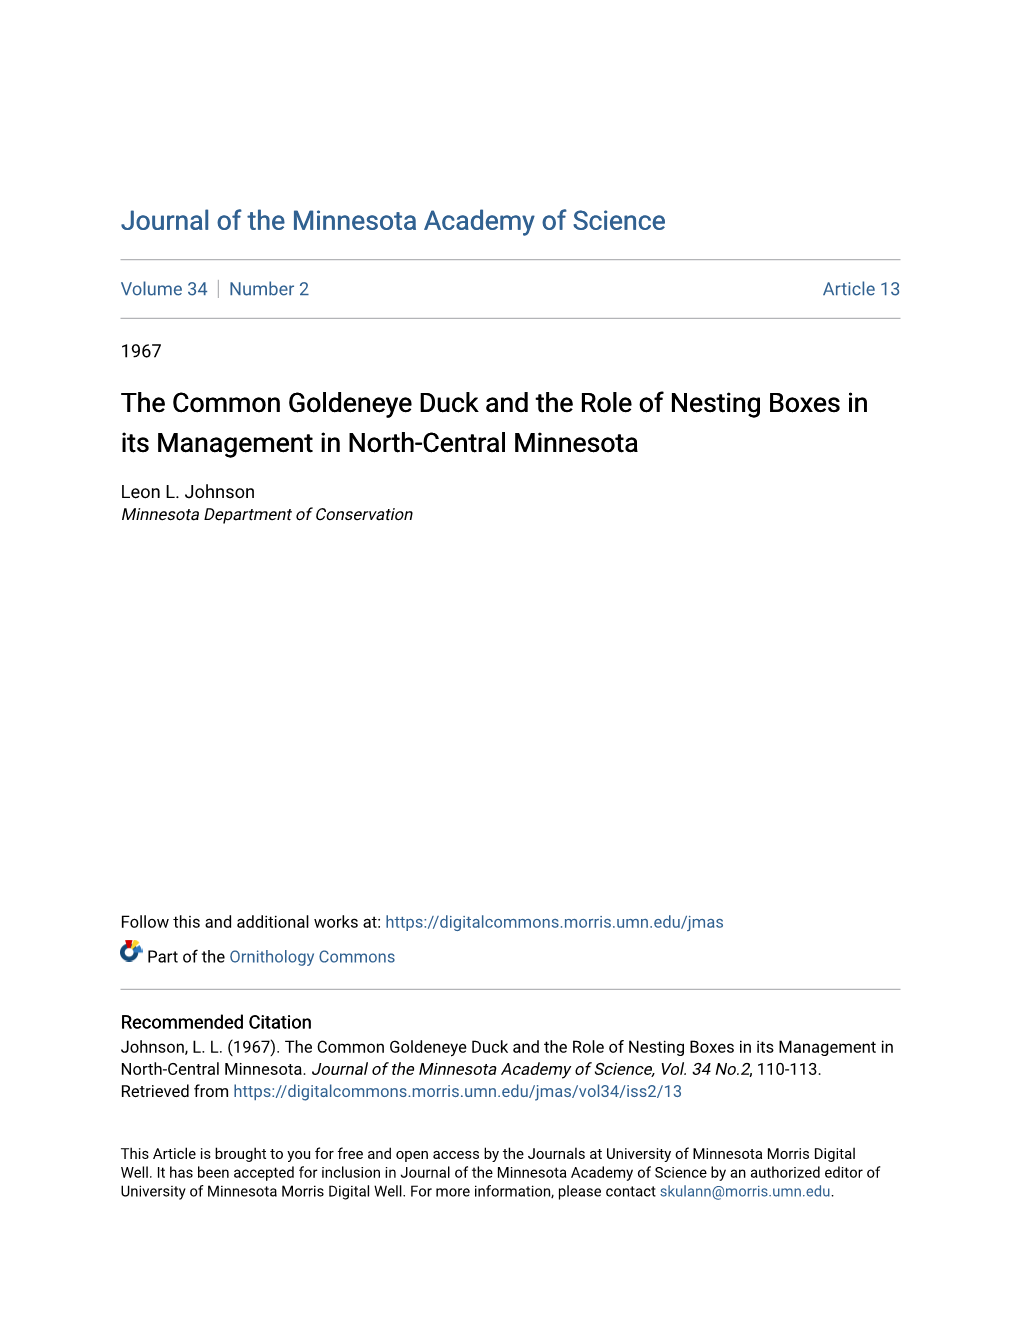 The Common Goldeneye Duck and the Role of Nesting Boxes in Its Management in North-Central Minnesota